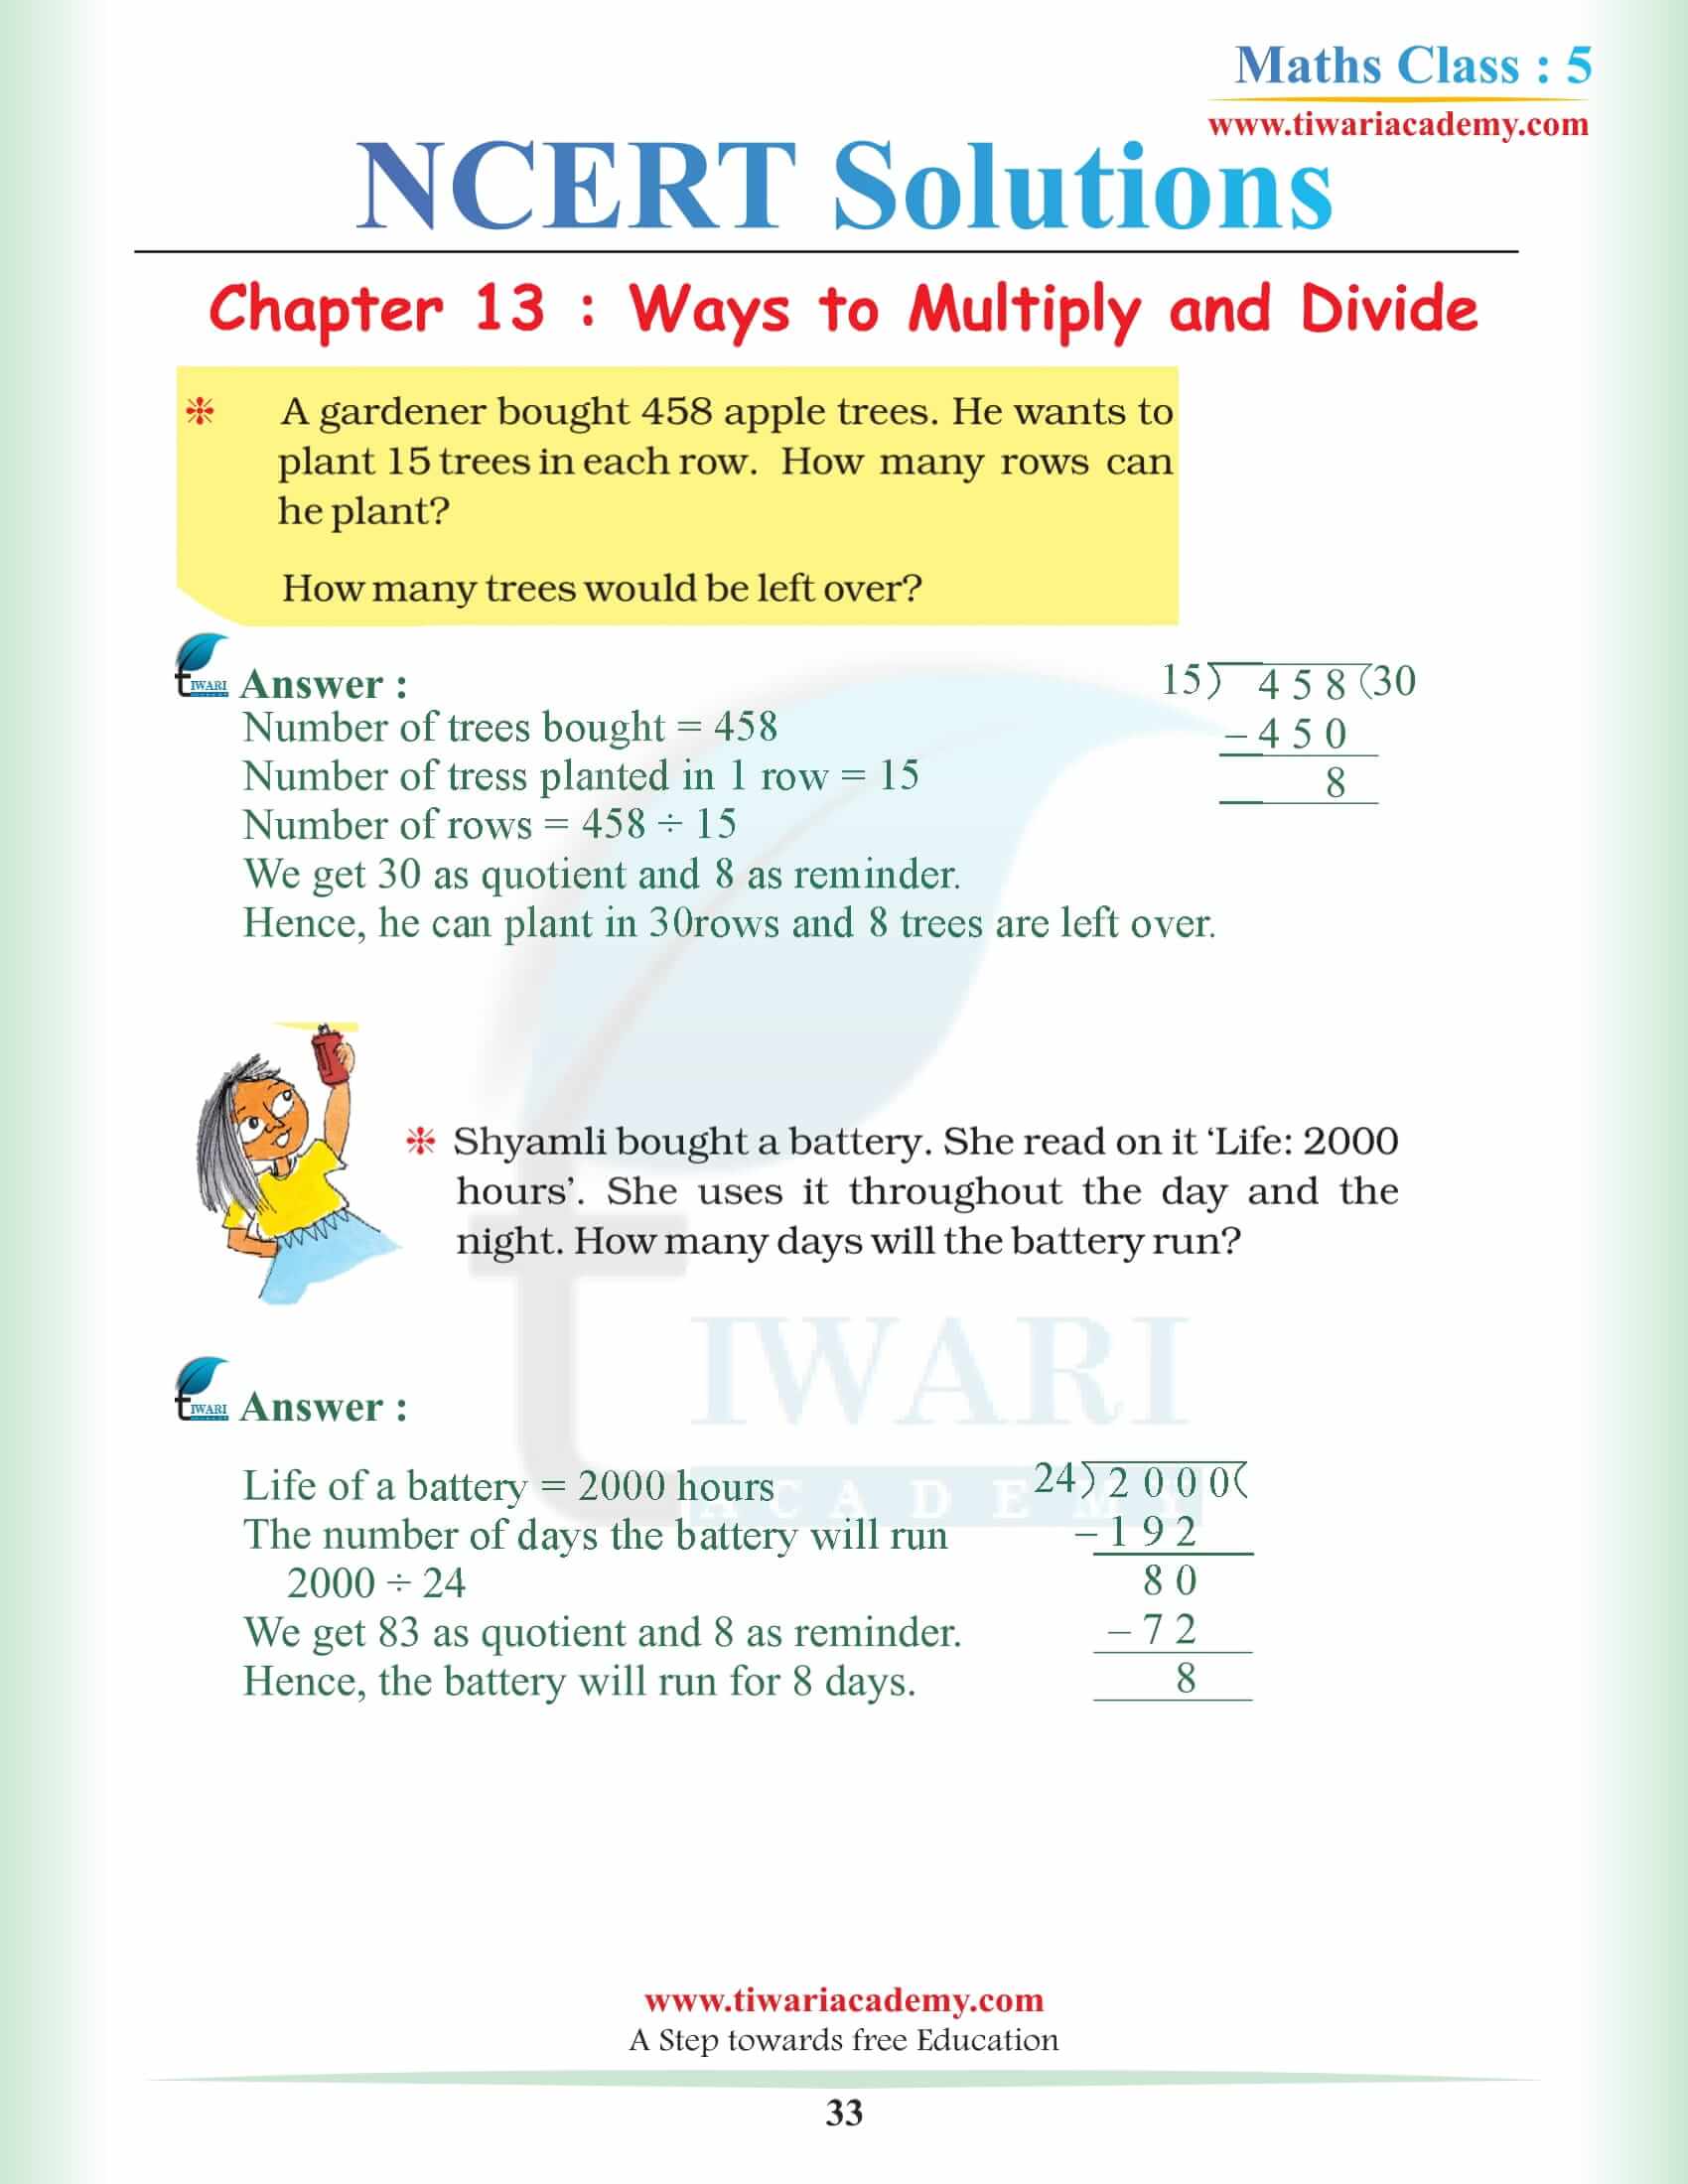 Maths 5th Class Chapter 13 NCERT free answers